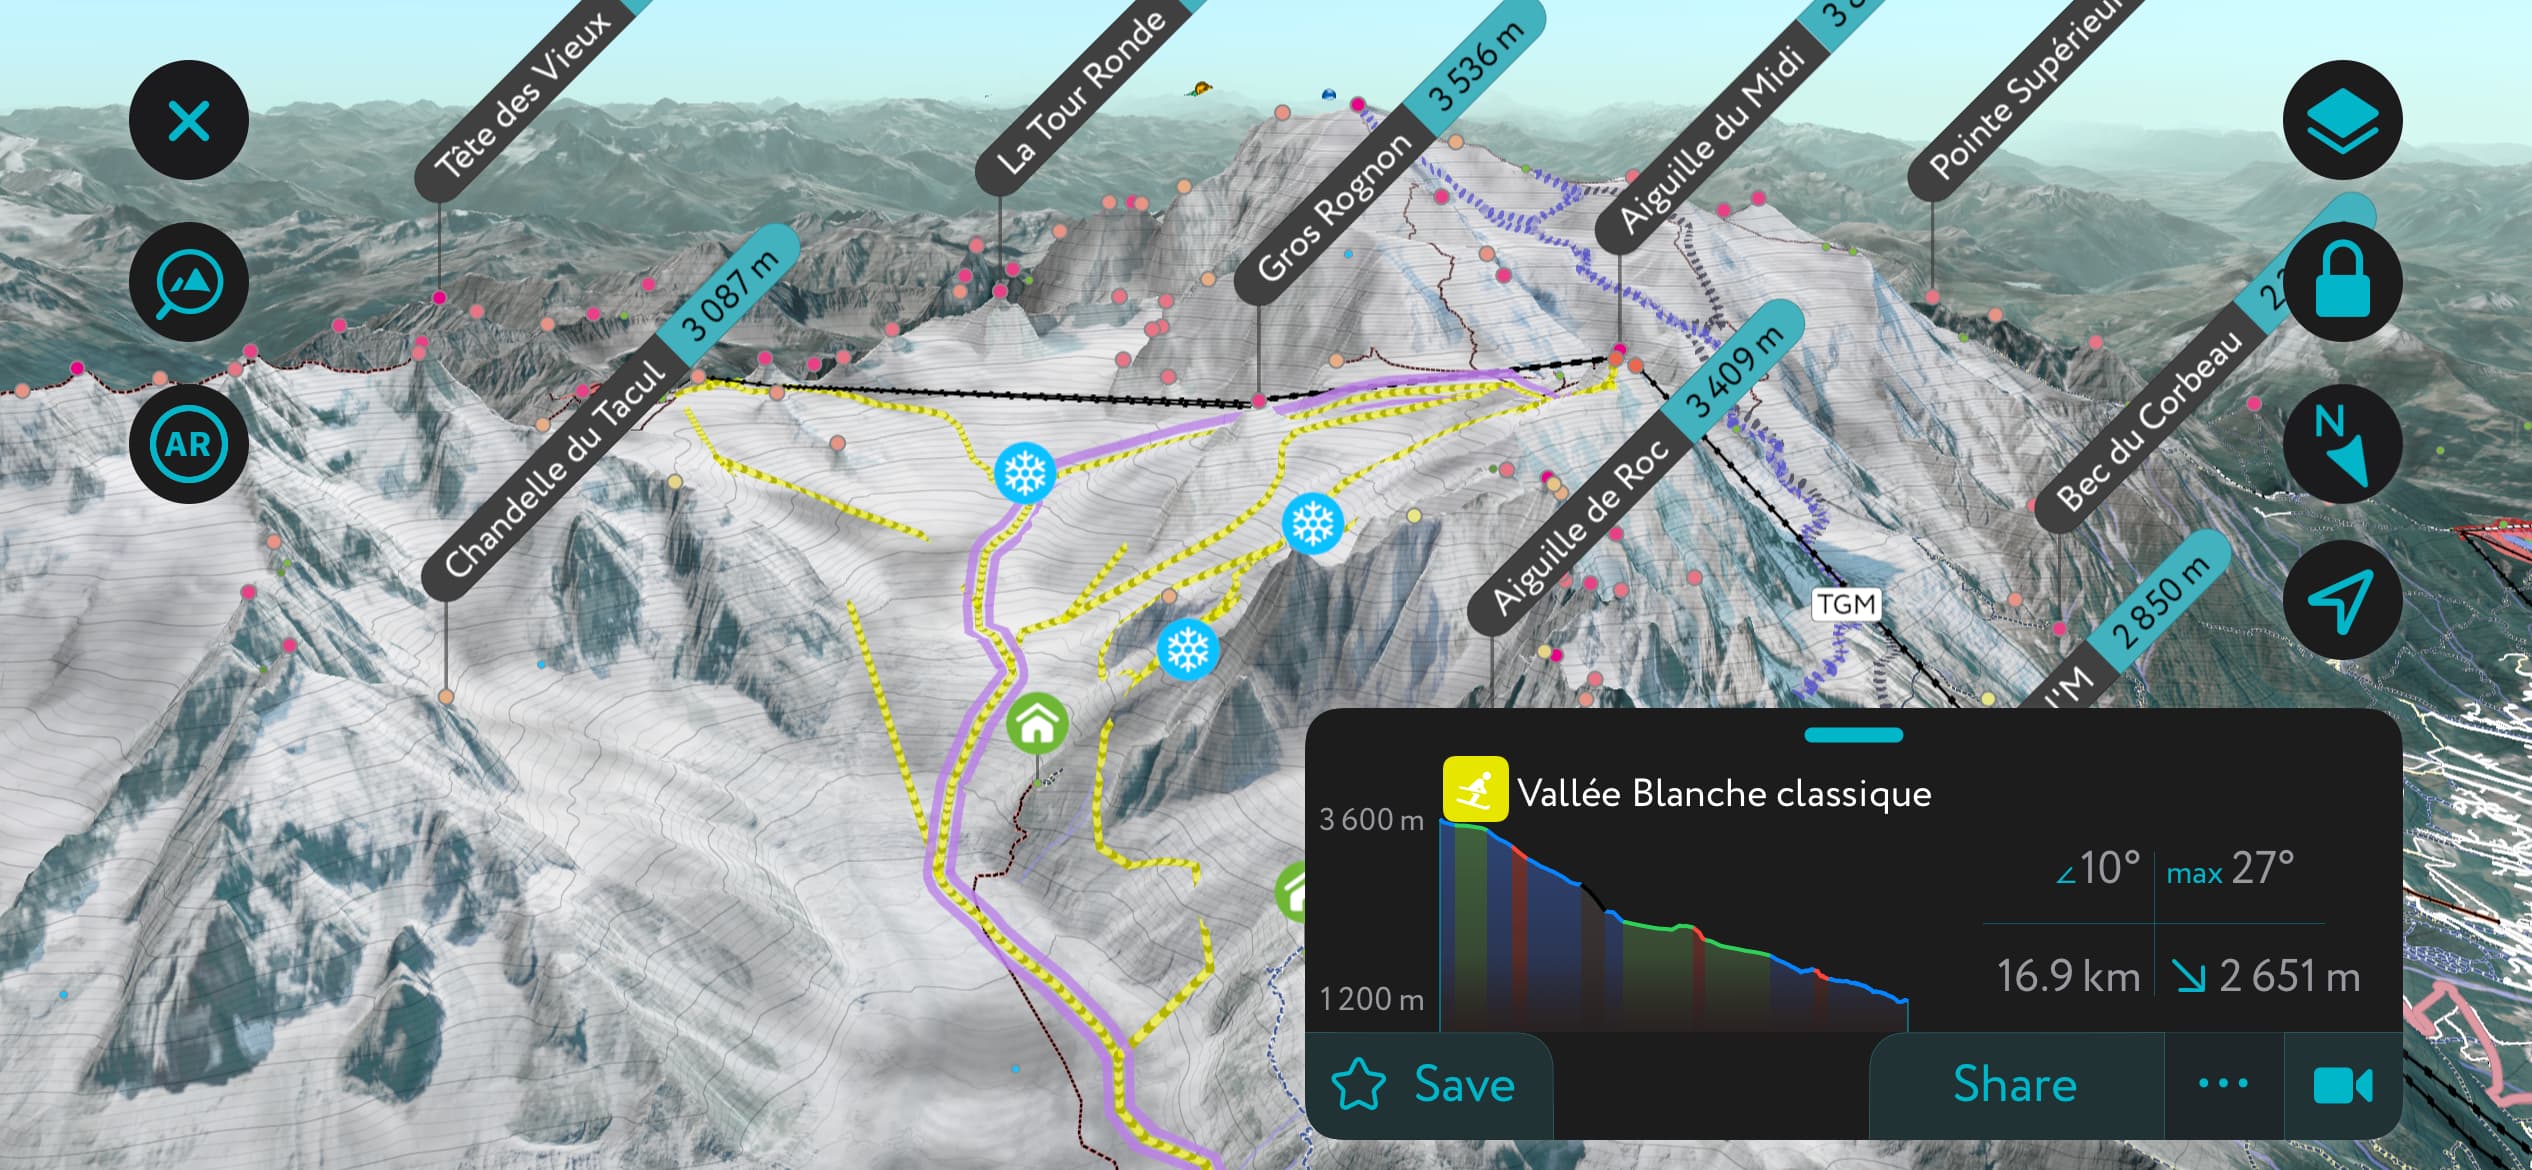 The Secrets to Finding the Best Snow Off-Piste. The app also features many, many off-piste routes, such as the infamous Vallée Blanche